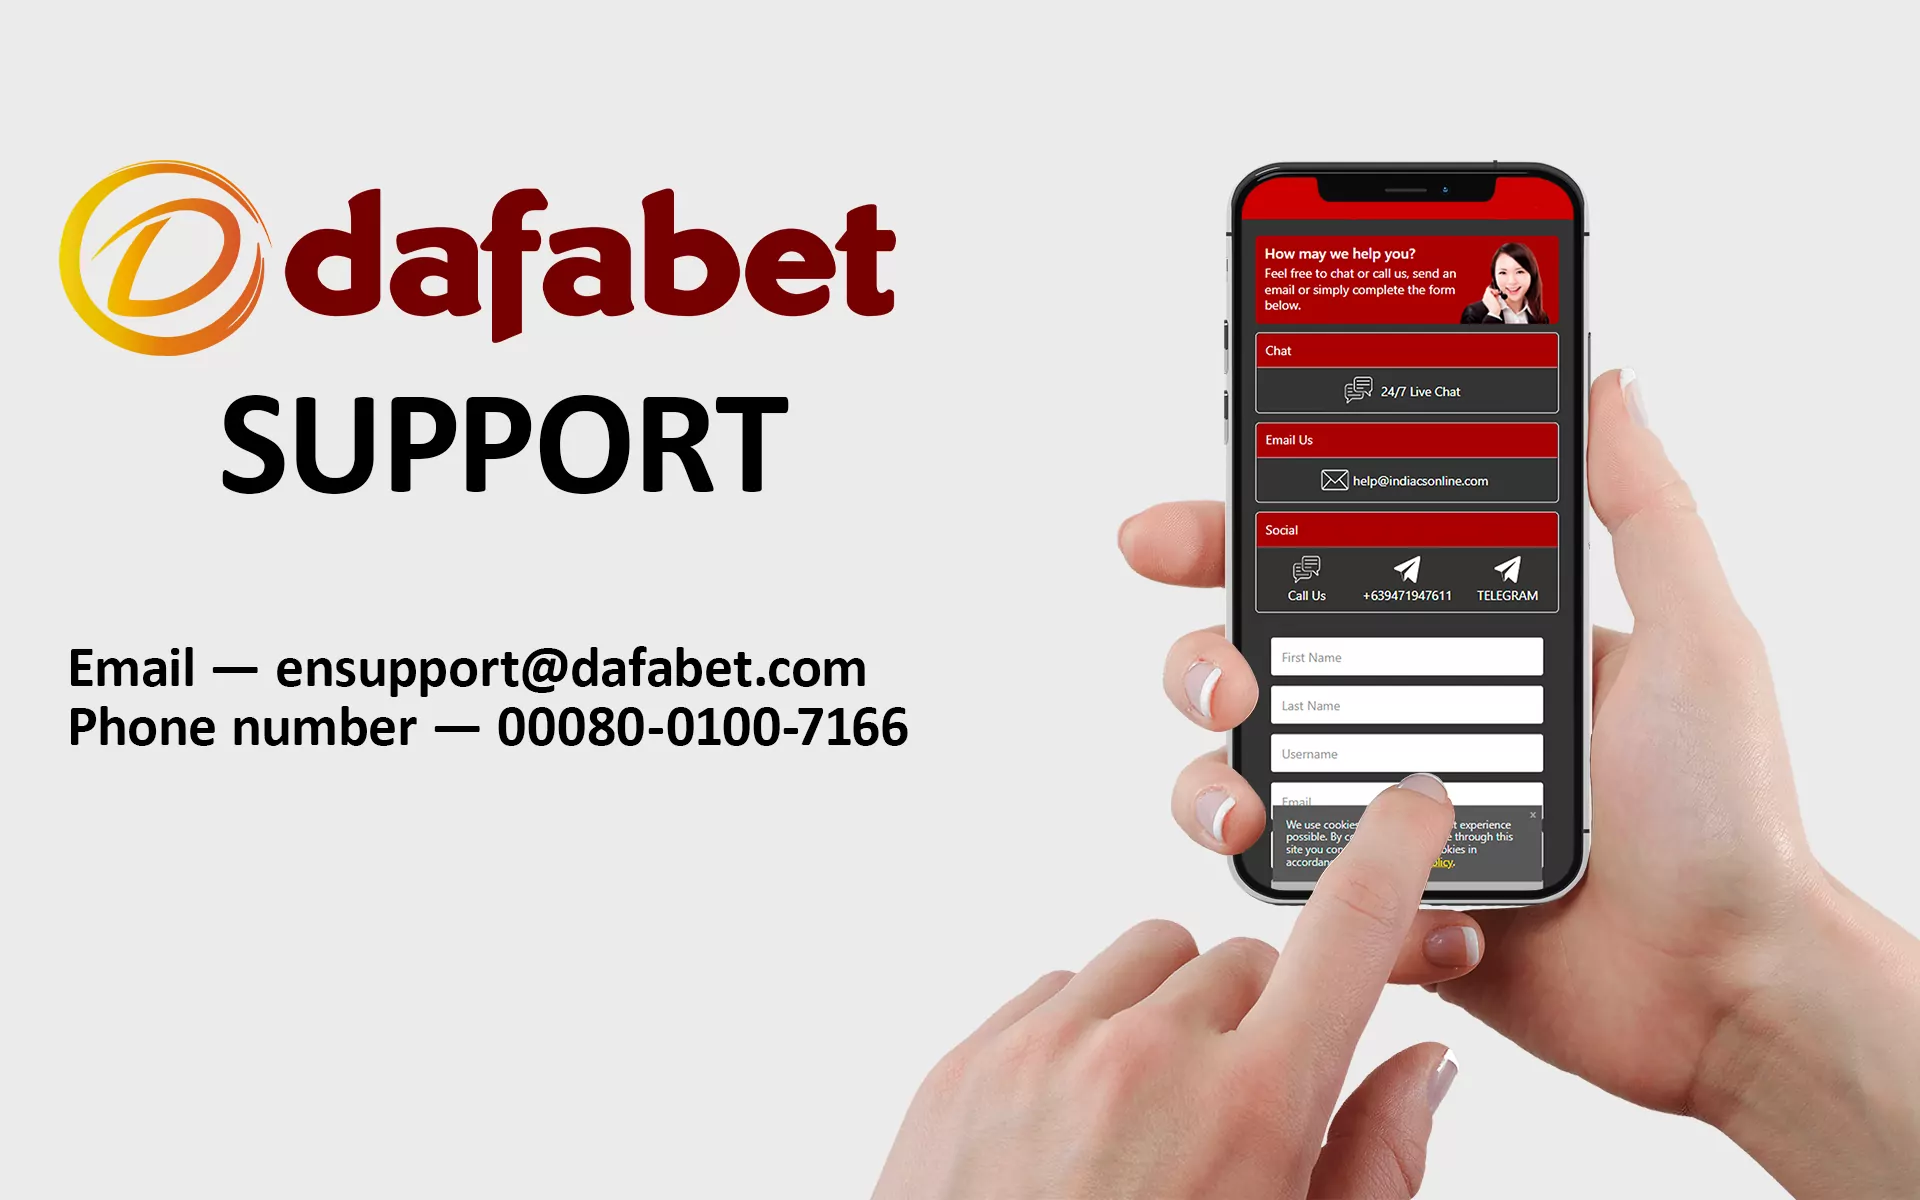 Contact the Dafabet support whether you have problems.